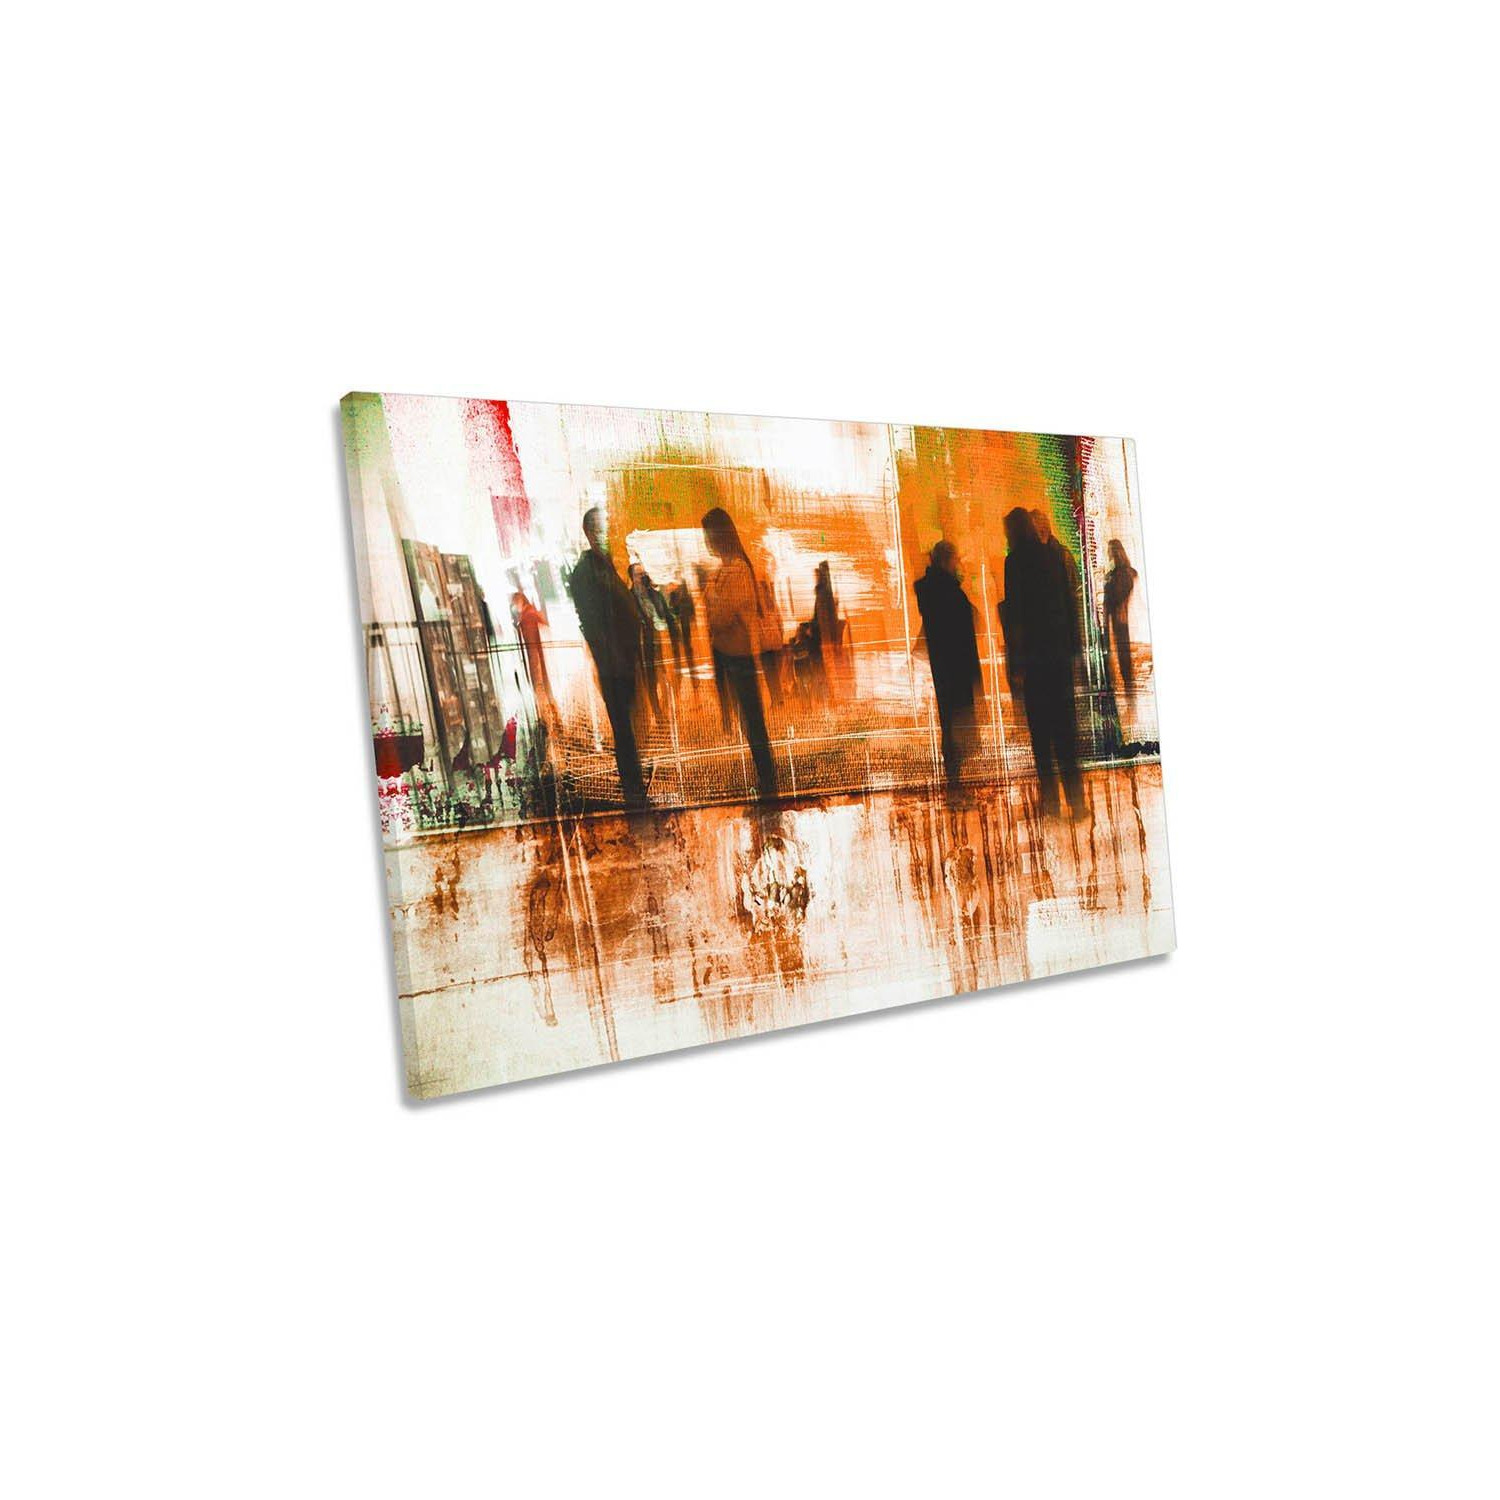 The Gathering Orange Abstract Canvas Wall Art Picture Print - image 1